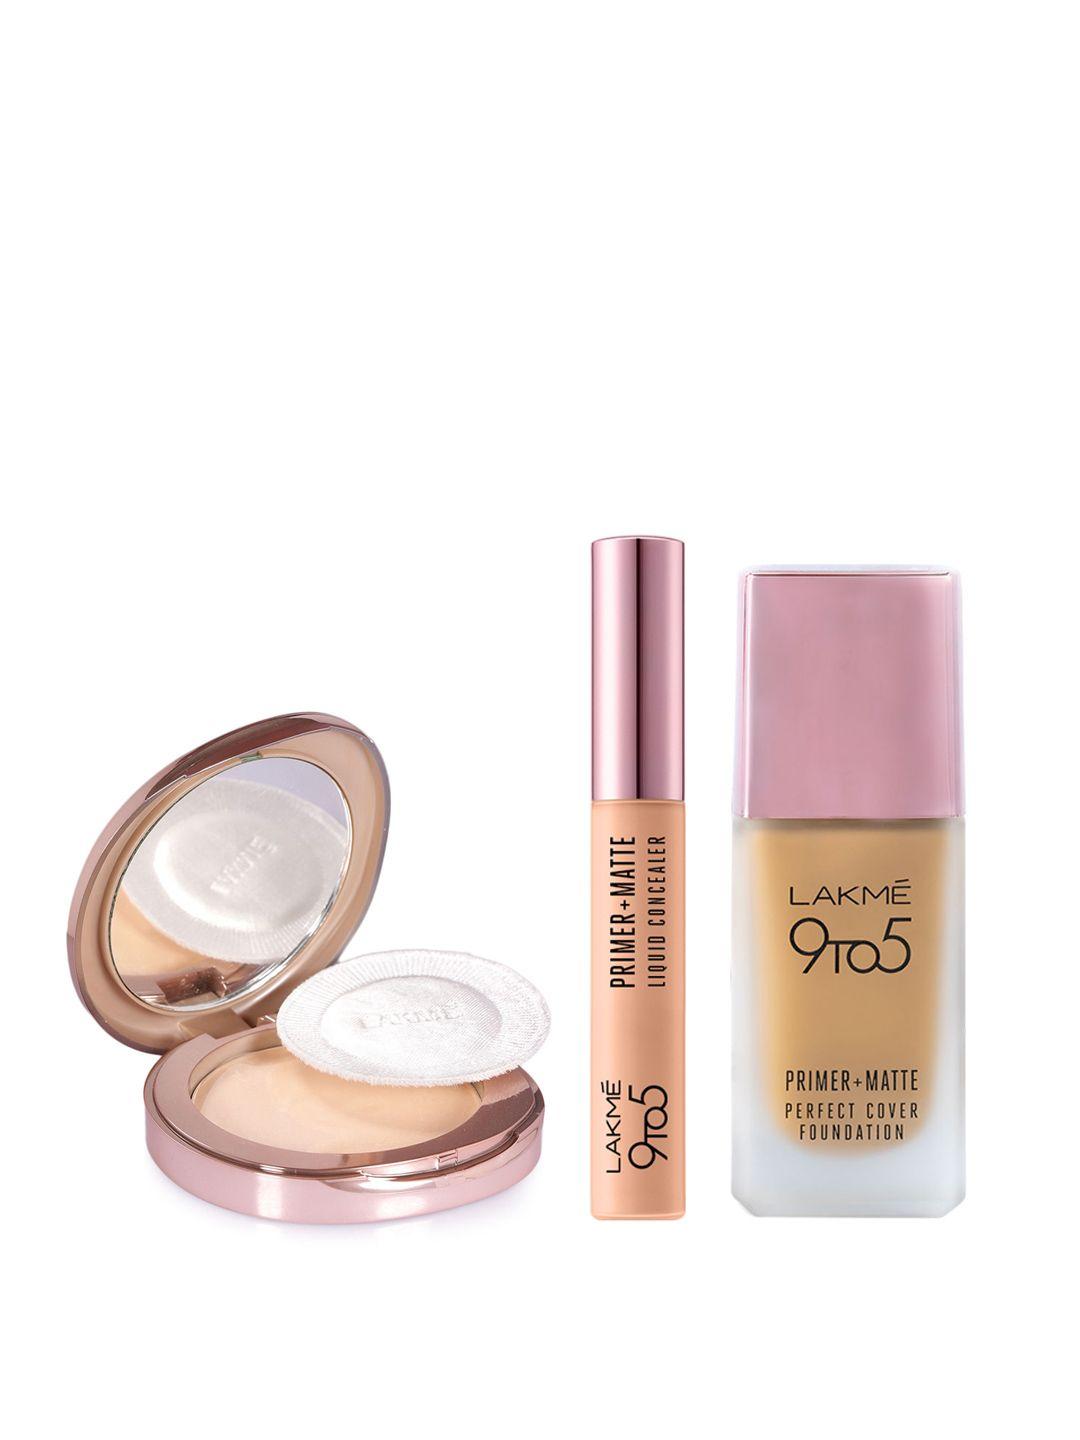 lakme set of 9to5 primer+matte concealer & foundation with flawless matte compact